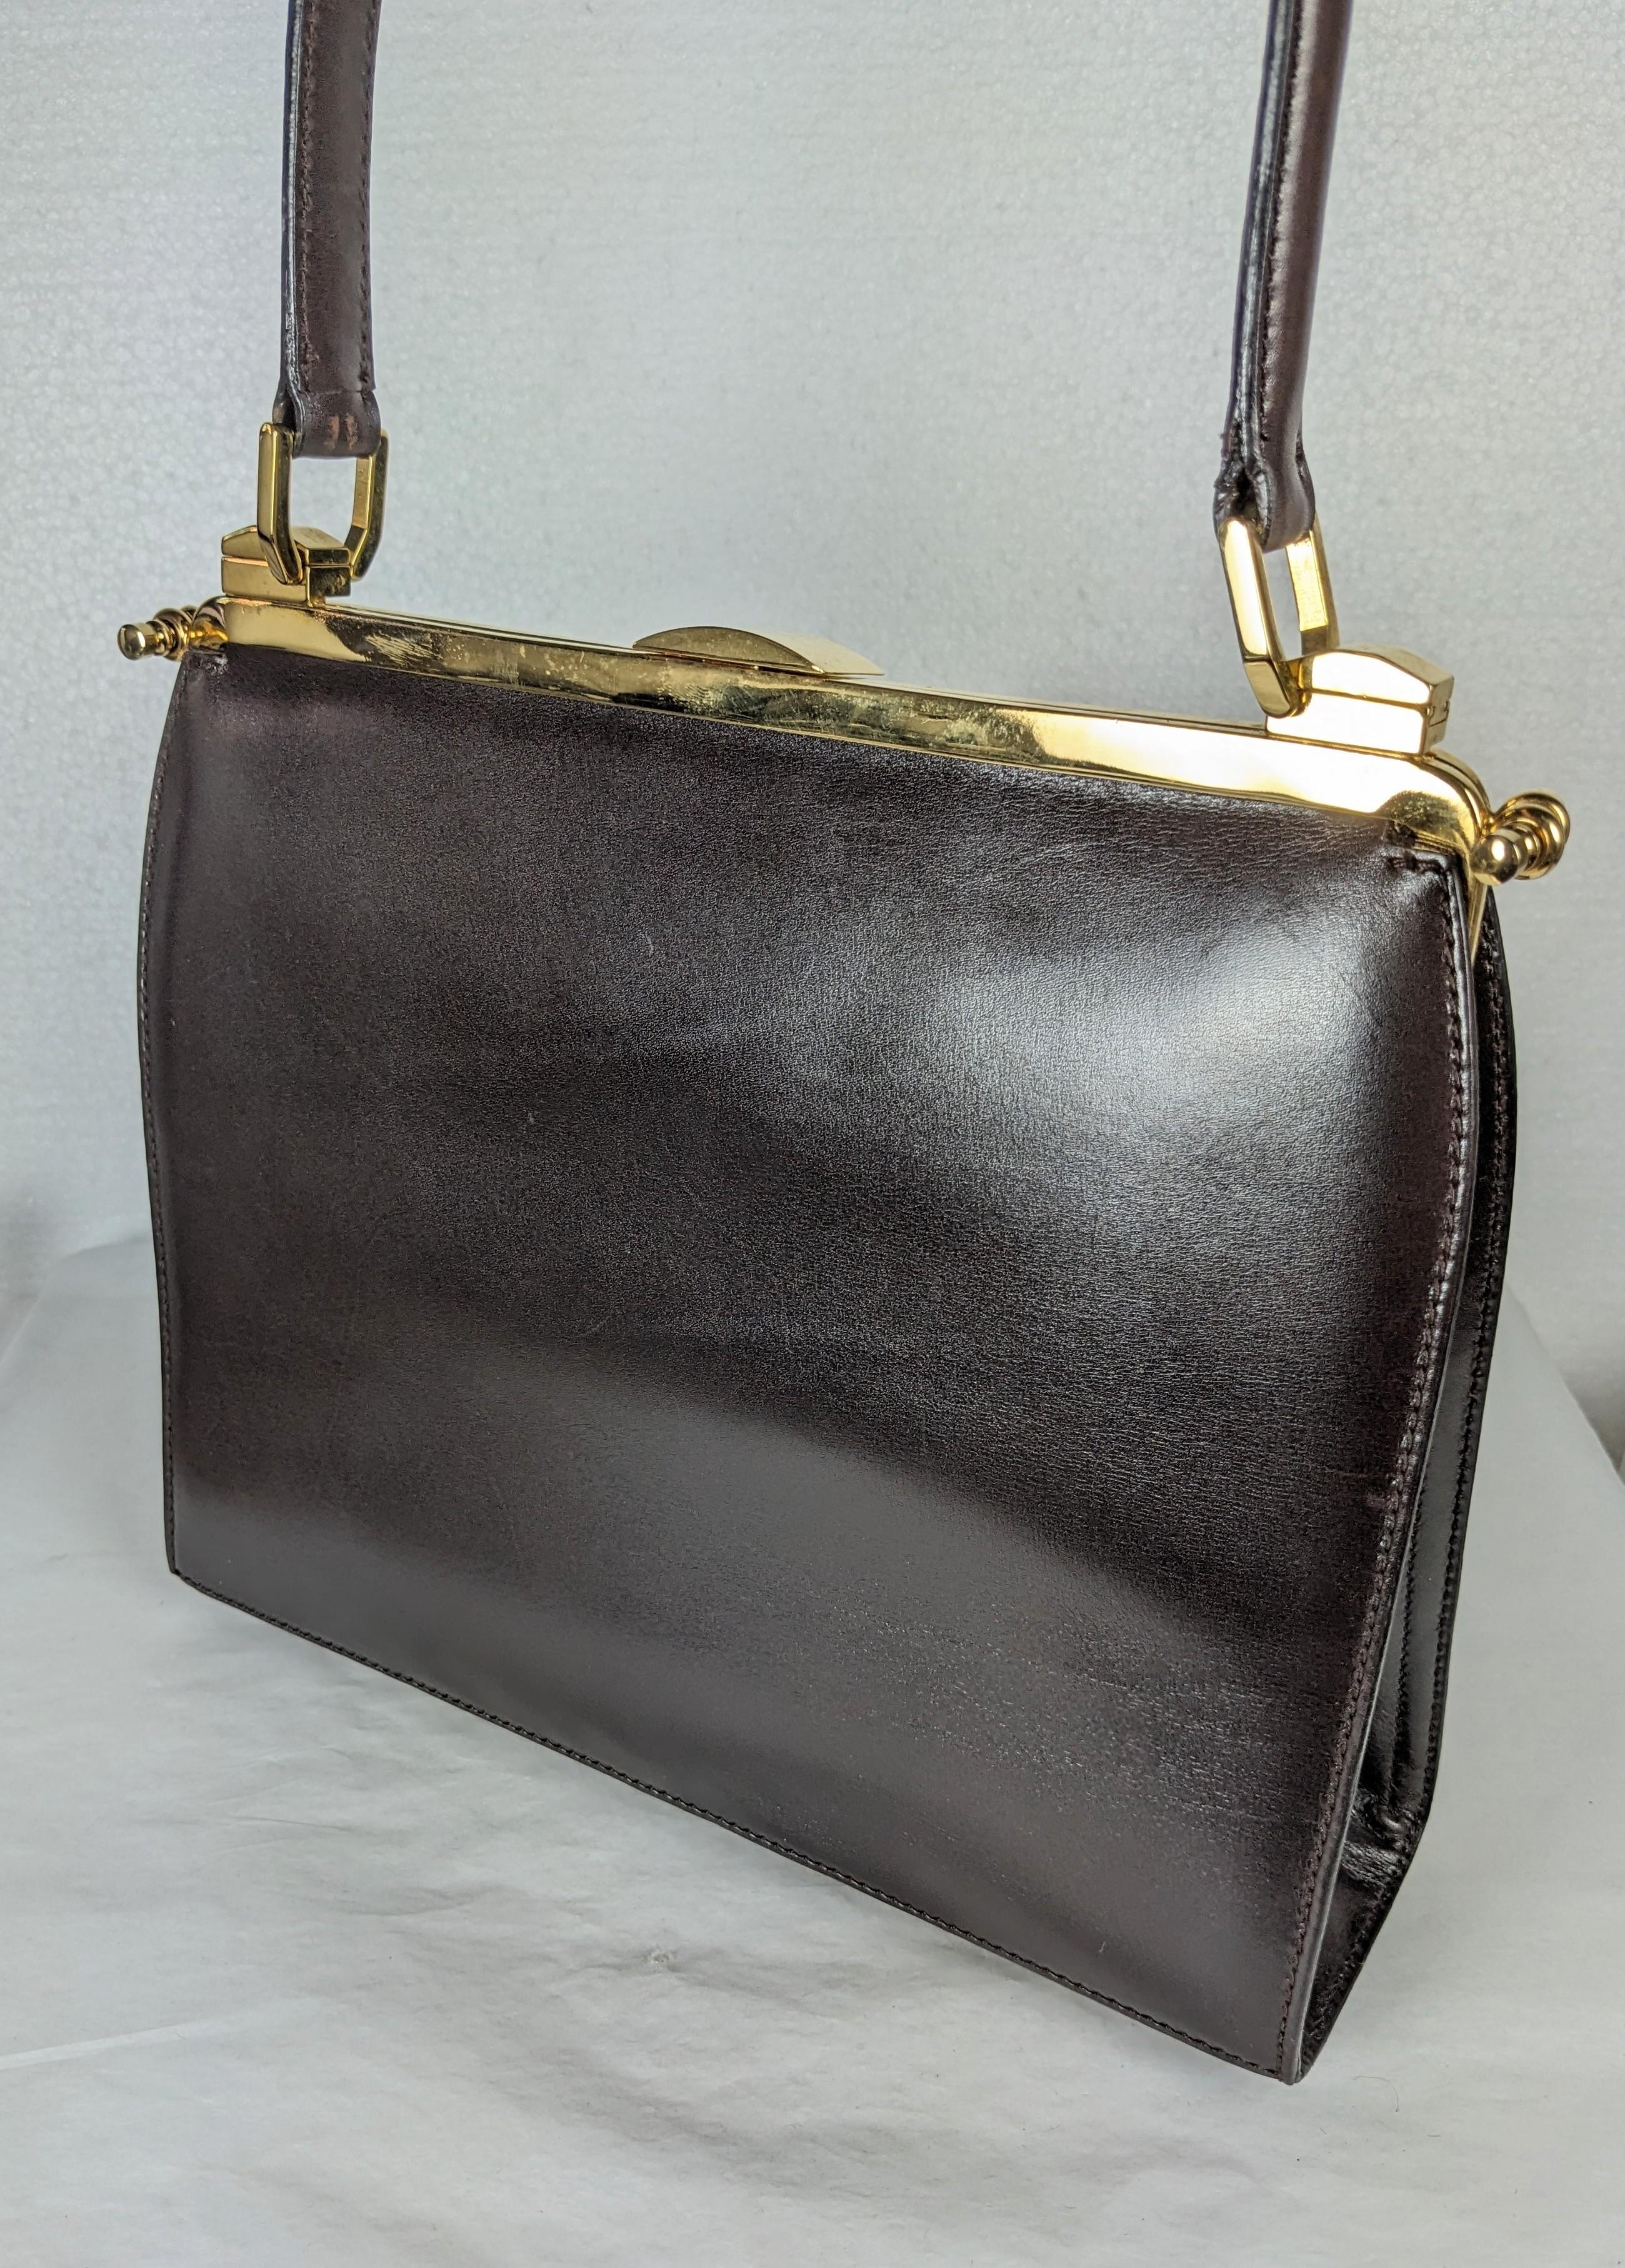 Dotti, Rome Transformable Leather Bag with Beaded Covers In Excellent Condition For Sale In New York, NY